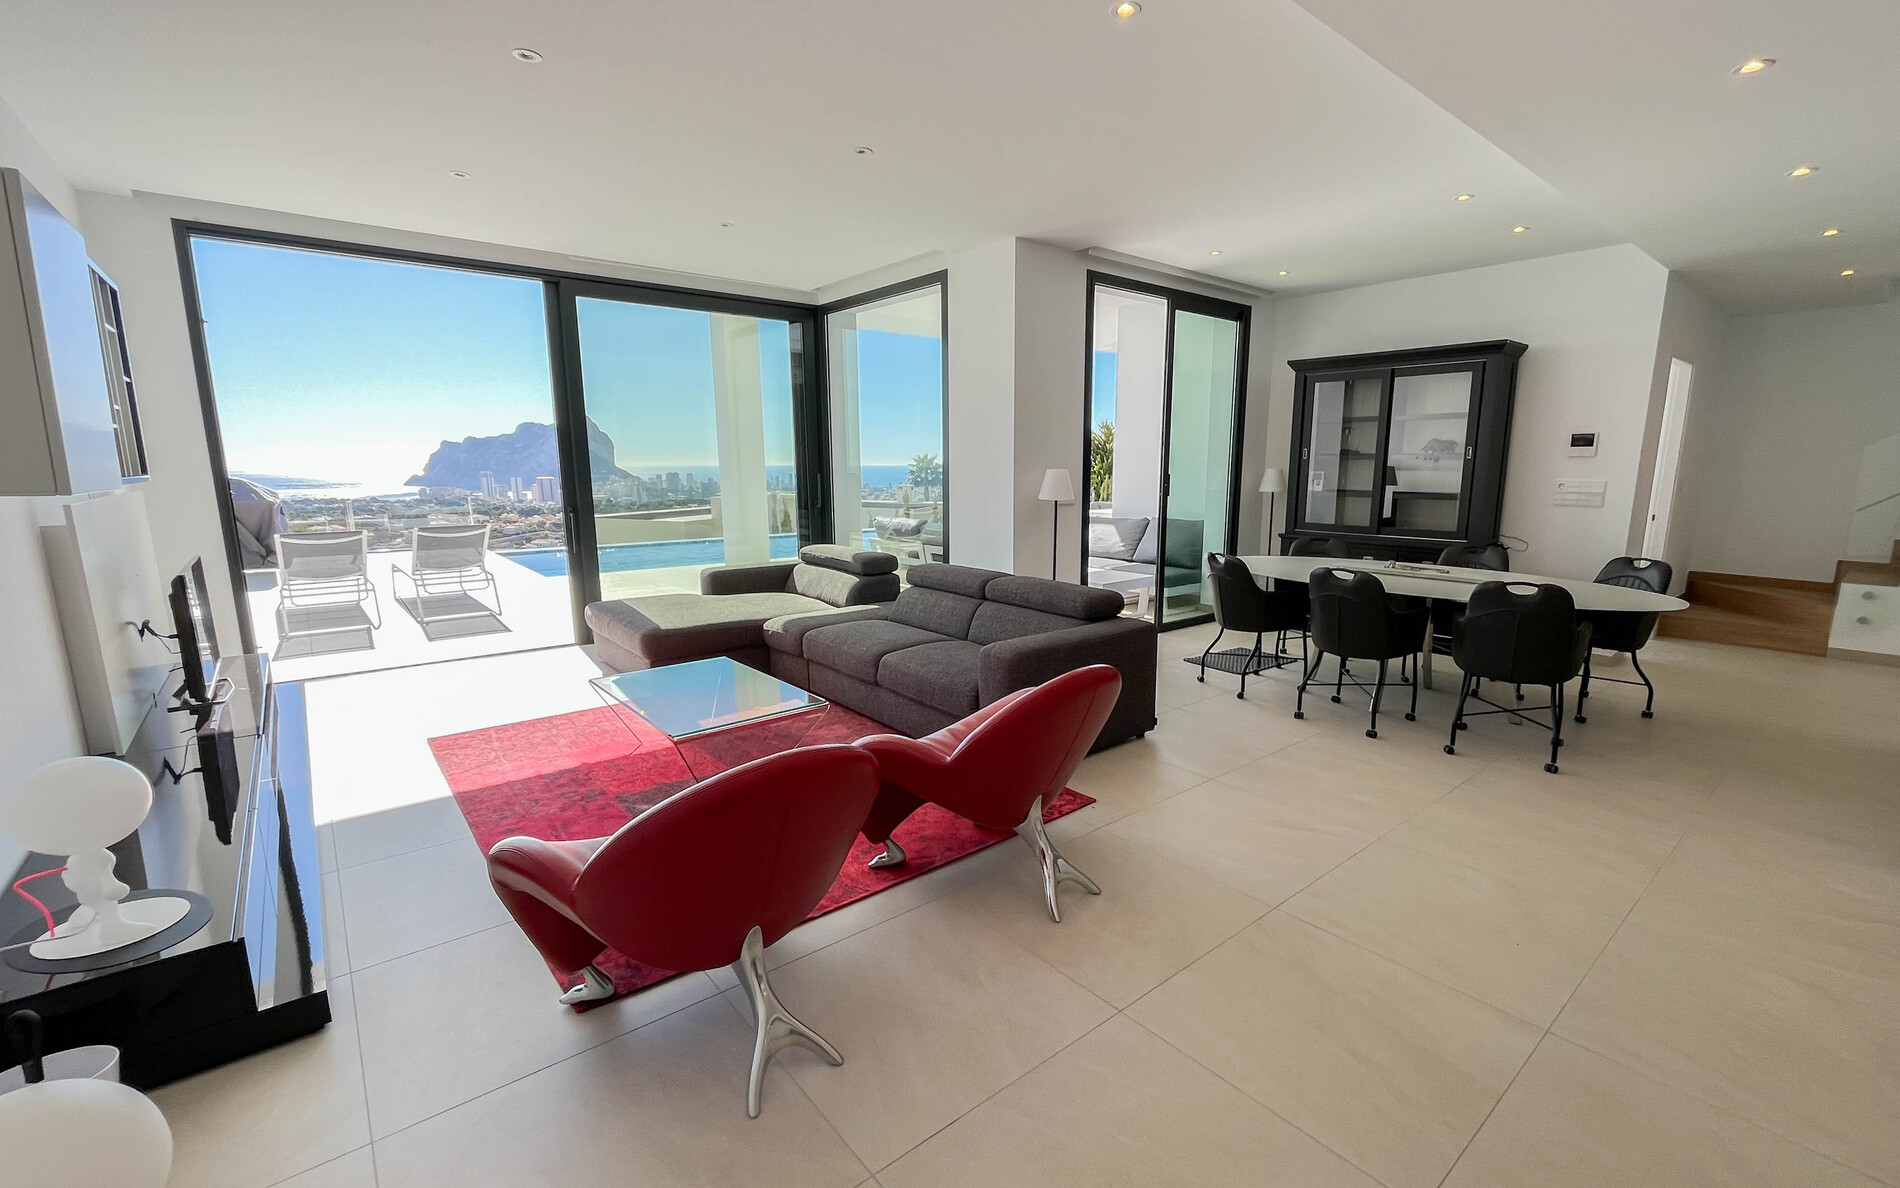 MODERN MEDITERRANEAN STYLE VILLA WITH SEA VIEWS IN CALPE | Built and Sold by GH Costa Blanca Real Estate